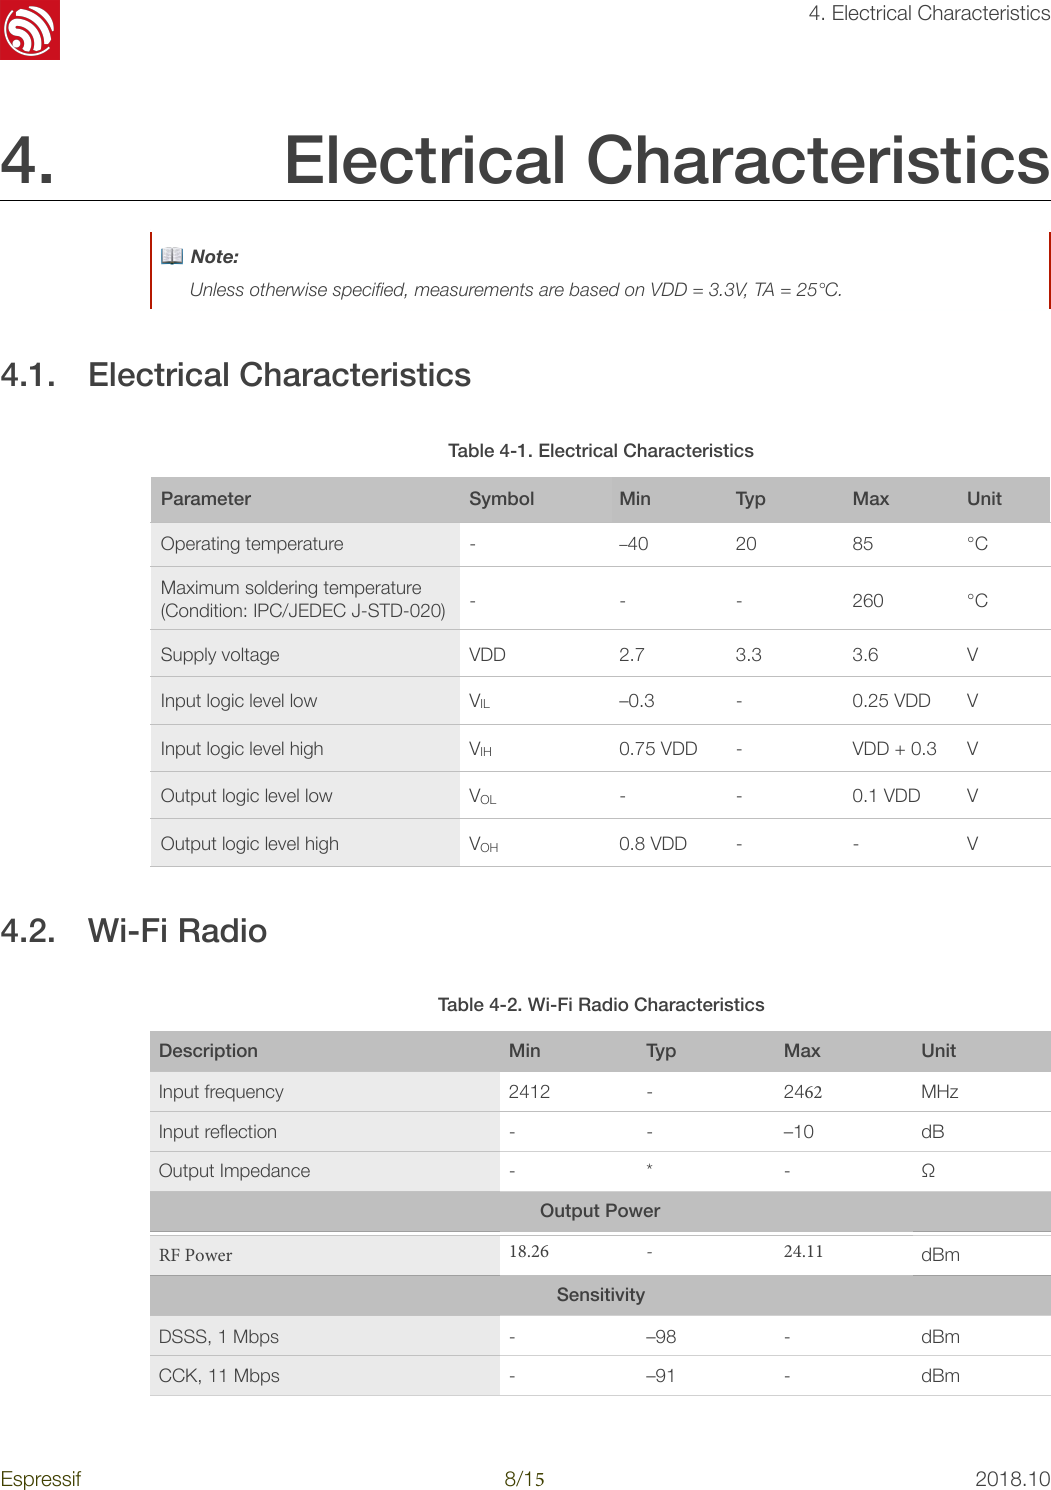 !4. Electrical Characteristics4. Electrical Characteristics4.1. Electrical Characteristics 4.2. Wi-Fi Radio 📖 Note: Unless otherwise speciﬁed, measurements are based on VDD = 3.3V, TA = 25°C.Table 4-1. Electrical CharacteristicsParameterSymbolMinTypMaxUnitOperating temperature-–402085℃Maximum soldering temperature(Condition: IPC/JEDEC J-STD-020)---260℃Supply voltageVDD2.73.33.6VInput logic level lowVIL–0.3-0.25 VDDVInput logic level highVIH0.75 VDD-VDD + 0.3VOutput logic level lowVOL--0.1 VDDVOutput logic level highVOH0.8 VDD--VTable 4-2. Wi-Fi Radio CharacteristicsDescriptionMinTypMaxUnitInput frequency2412-2462MHzInput reﬂection-　-–10dBOutput Impedance-*-ΩOutput PowerRF Power 18.26 - 24.11 dBmSensitivityDSSS, 1 Mbps  - –98 - dBmCCK, 11 Mbps  - –91 - dBmEspressif!8/!152018.10